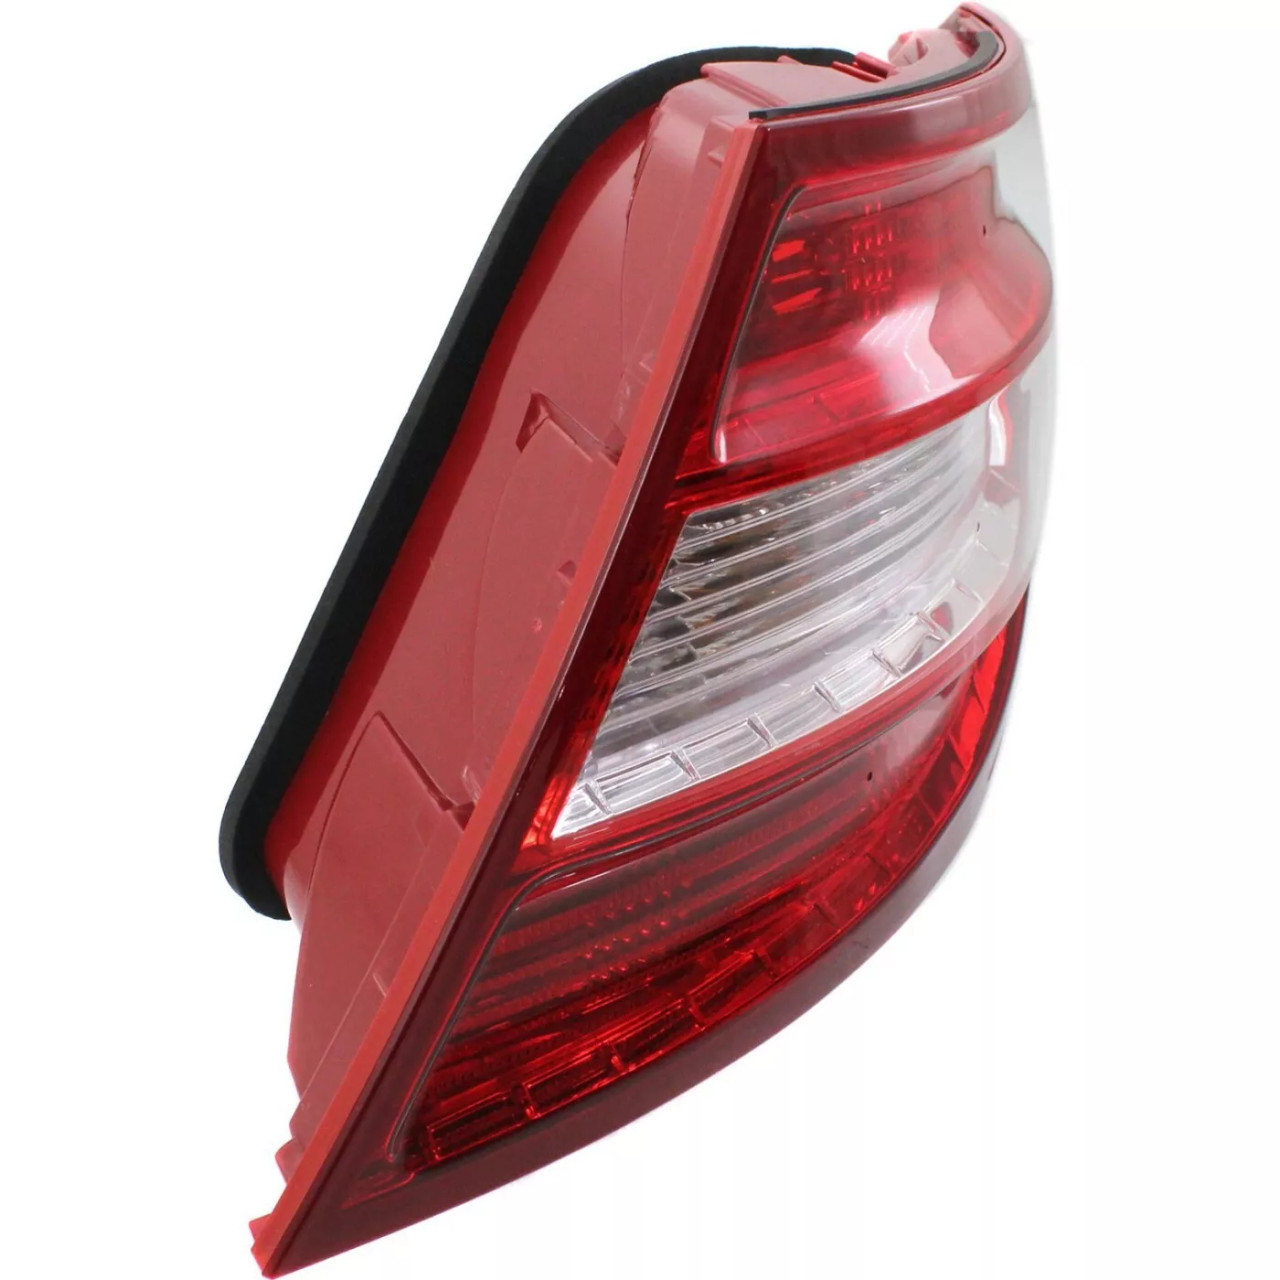 Set of 2 Tail Light For 2008-2010 Mercedes Benz C300 LH & RH w/ Bulb(s)